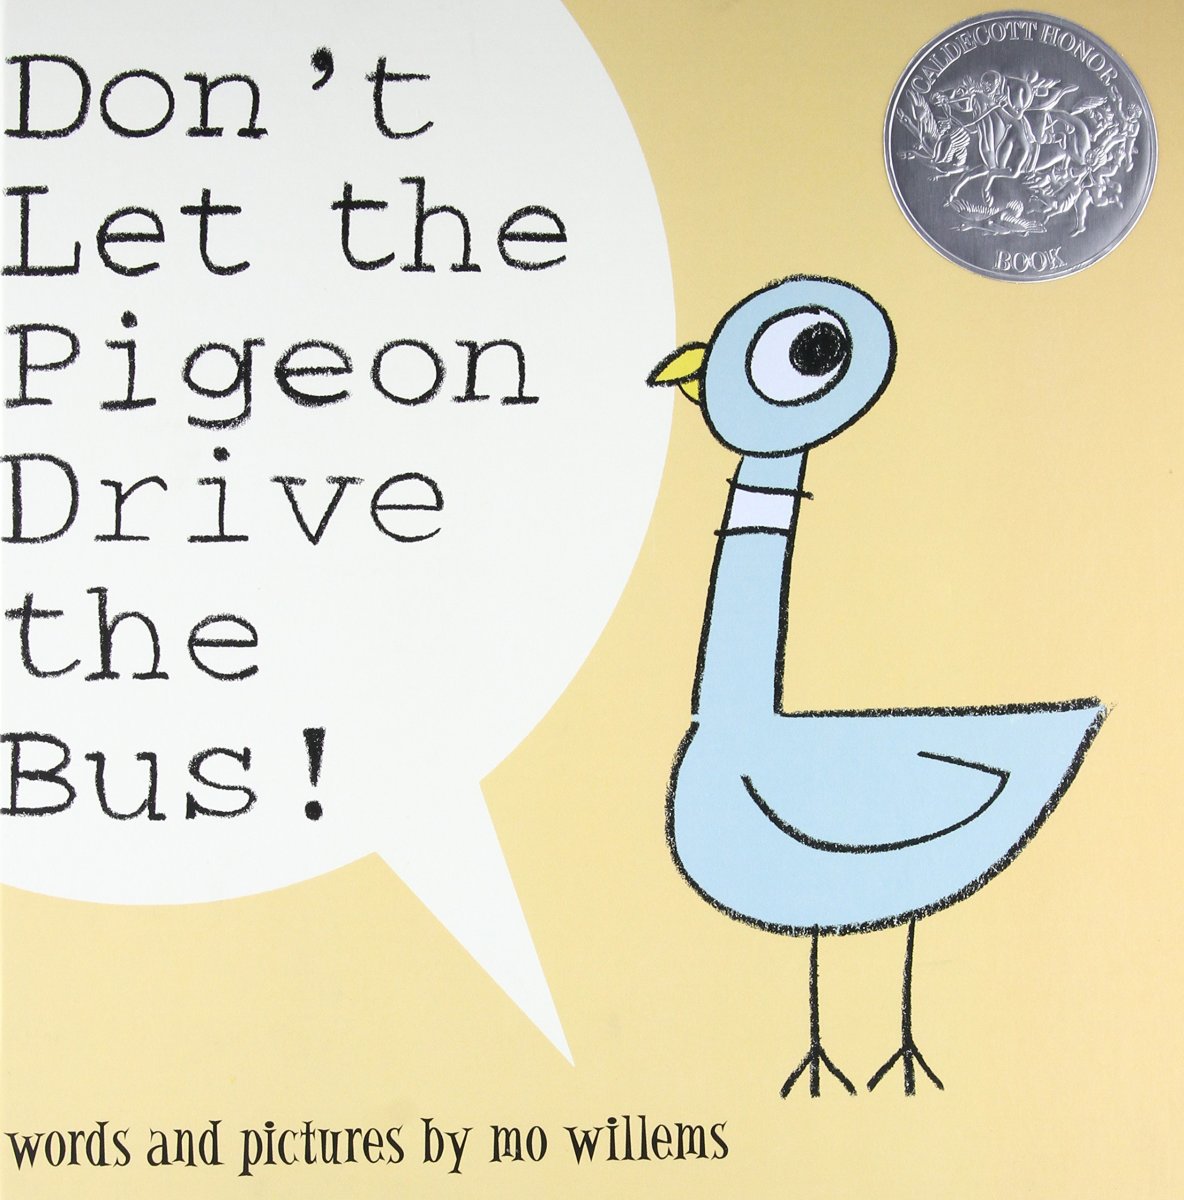 Author and illustrator Mo Willems has a site that teaches children to doodle 